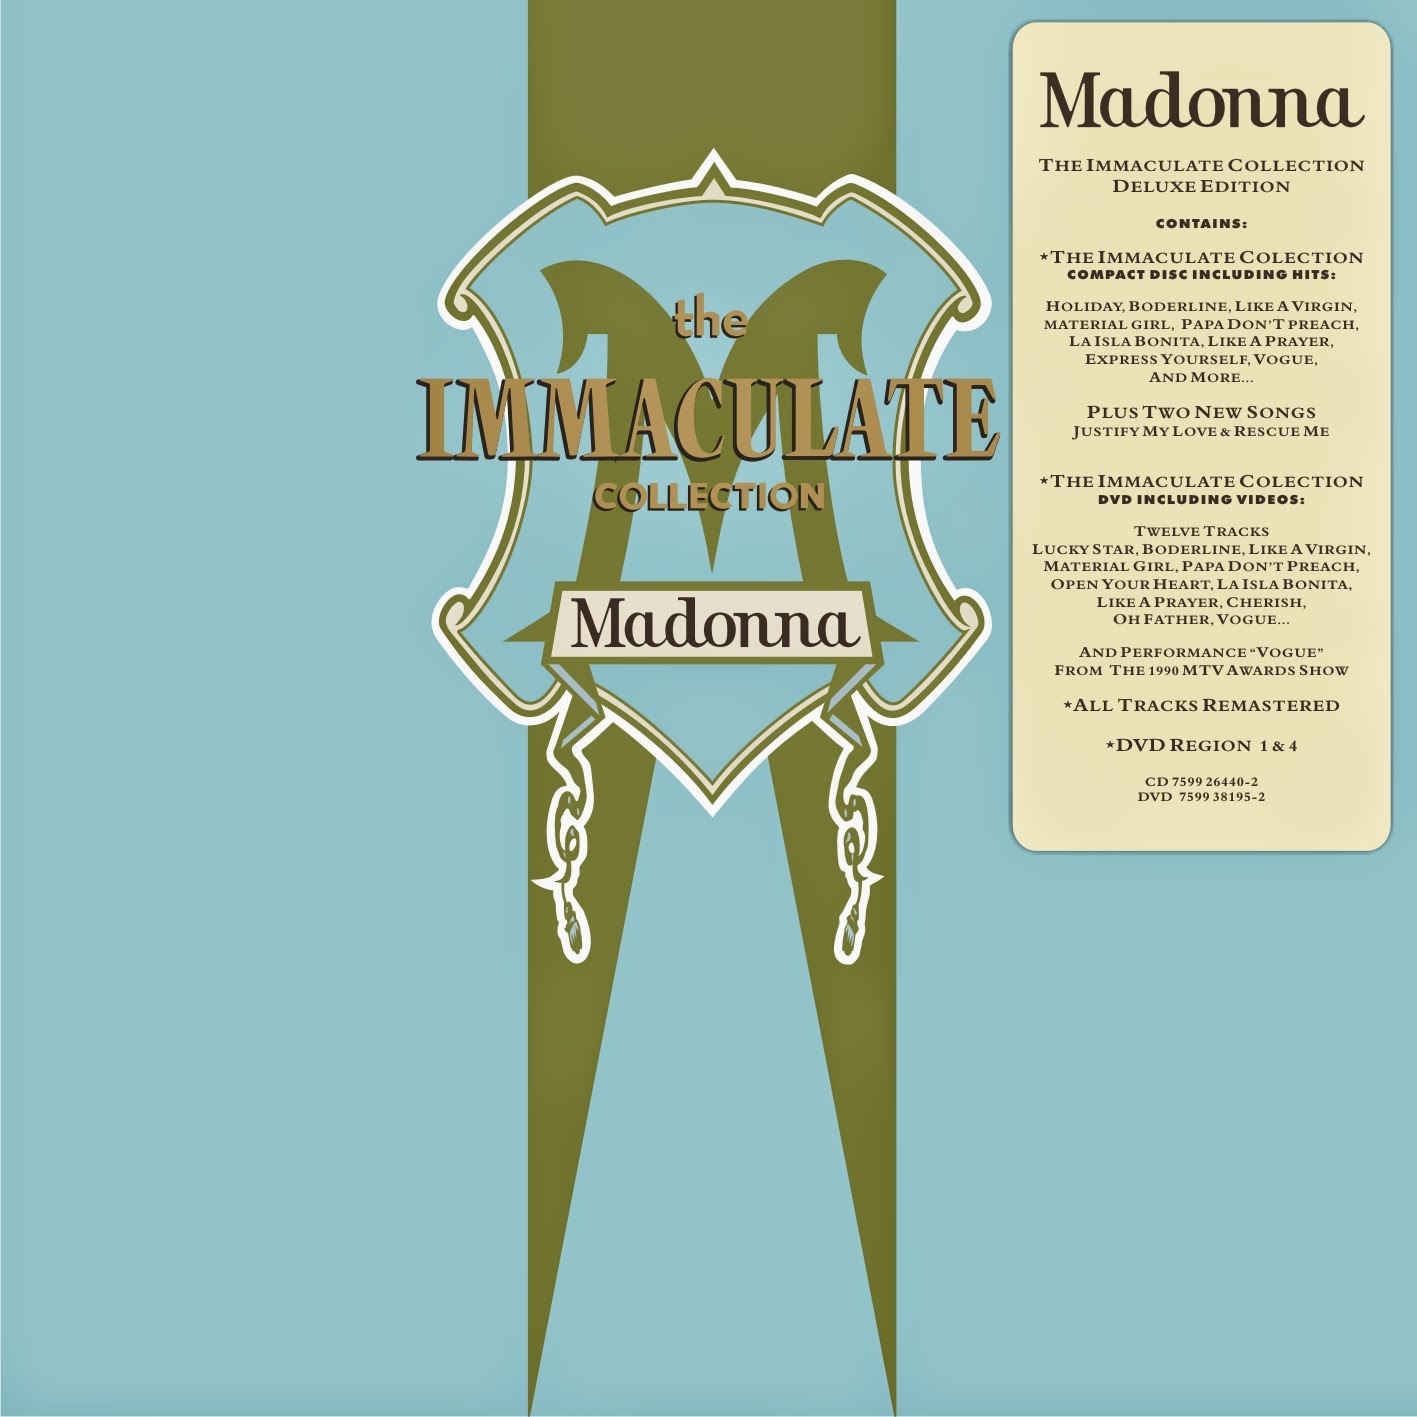 madonna the immaculate collection 1990 dvdrip 480p n1c torrent